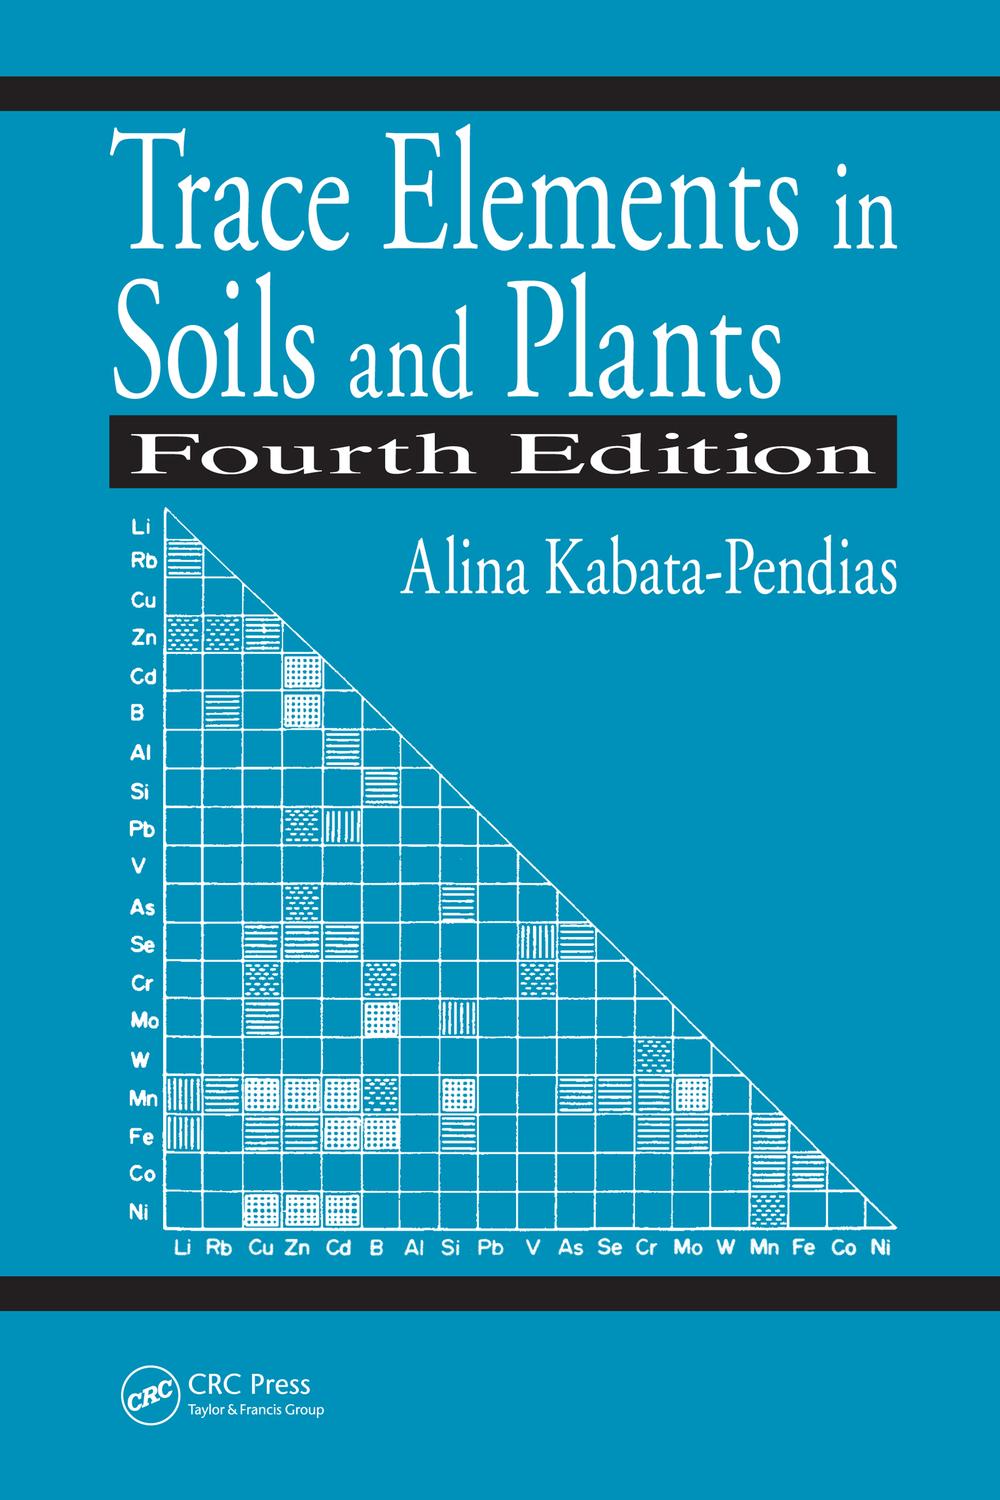 Trace Elements in Soils and Plants - Alina Kabata-Pendias